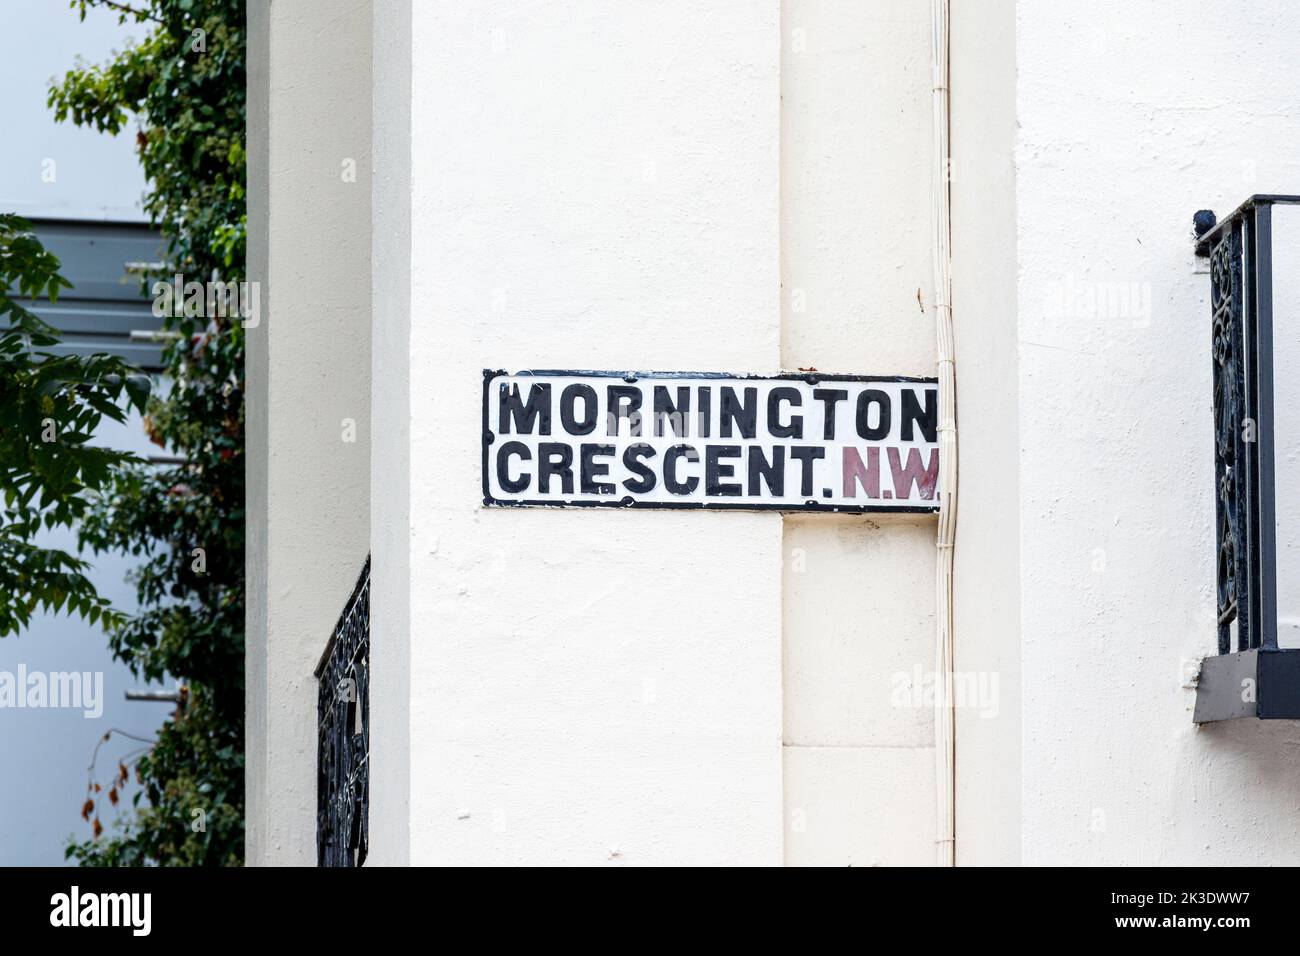 Street sign at Mornington Crescent, made famous by the BBC comedy show 'I'm Sorry I haven't a Clue', Camden, London, UK Stock Photo